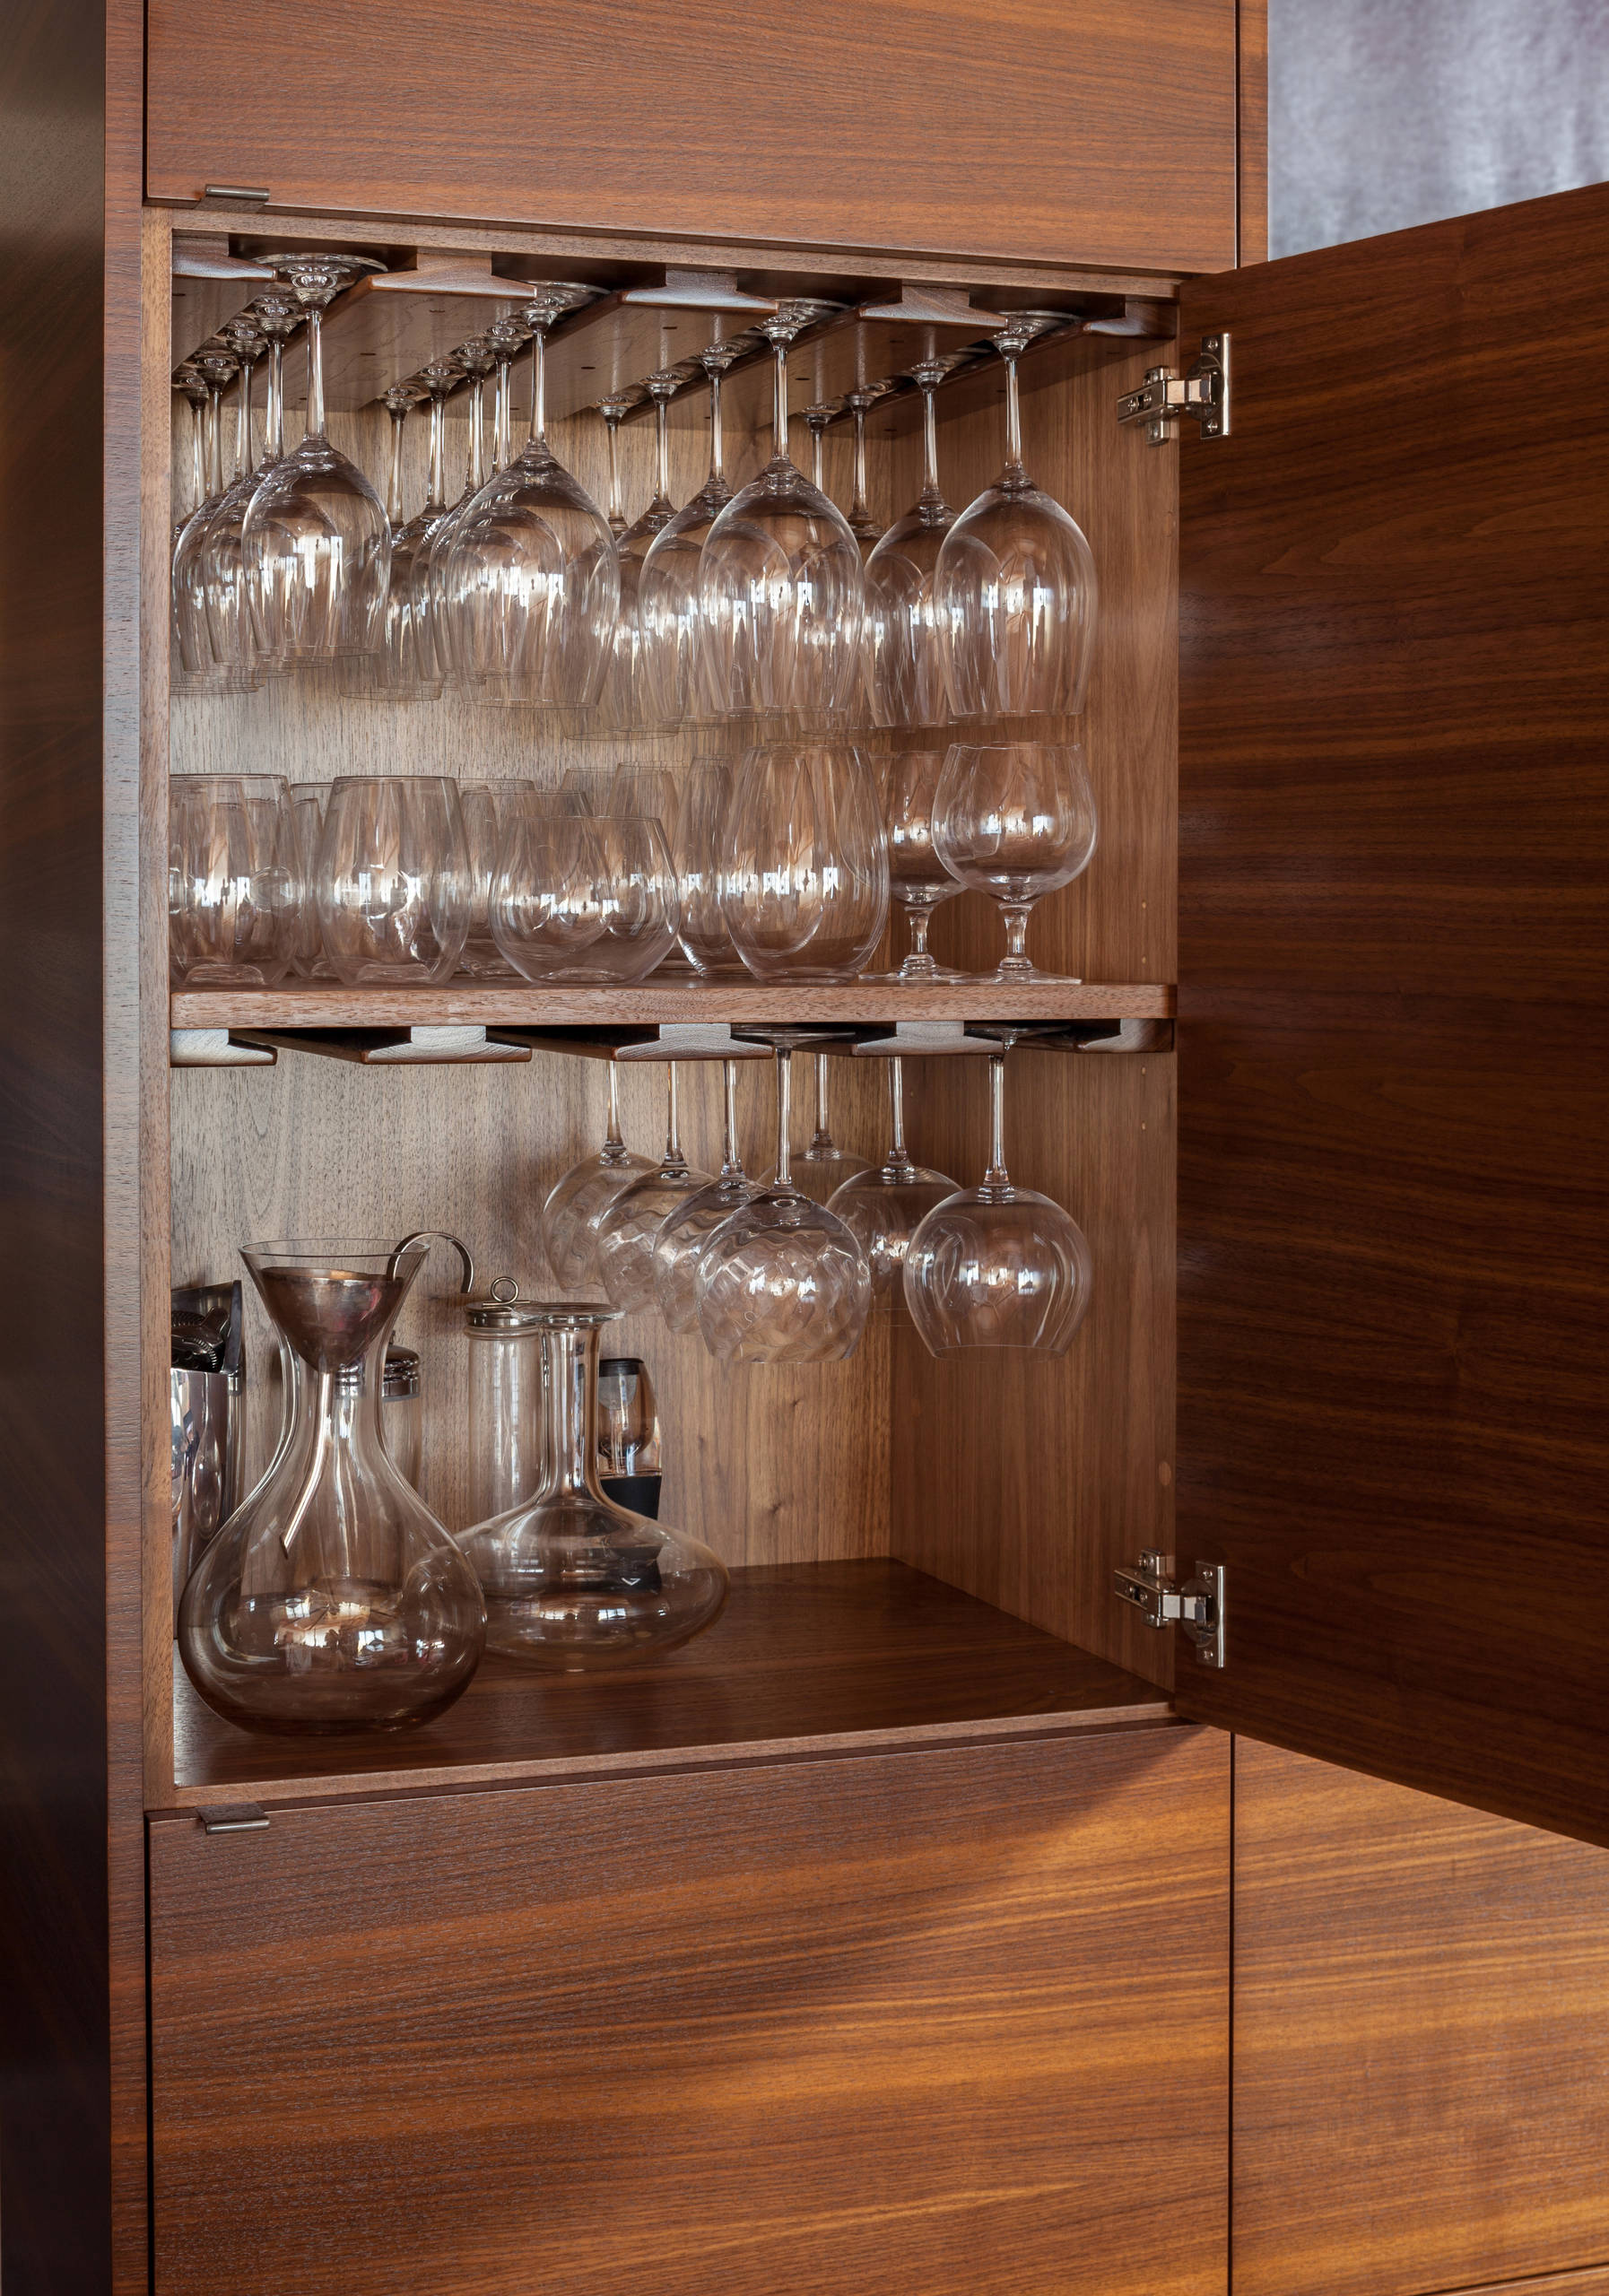 Storing Wine Glasses In Drawers Sale - anuariocidob.org 1690673259